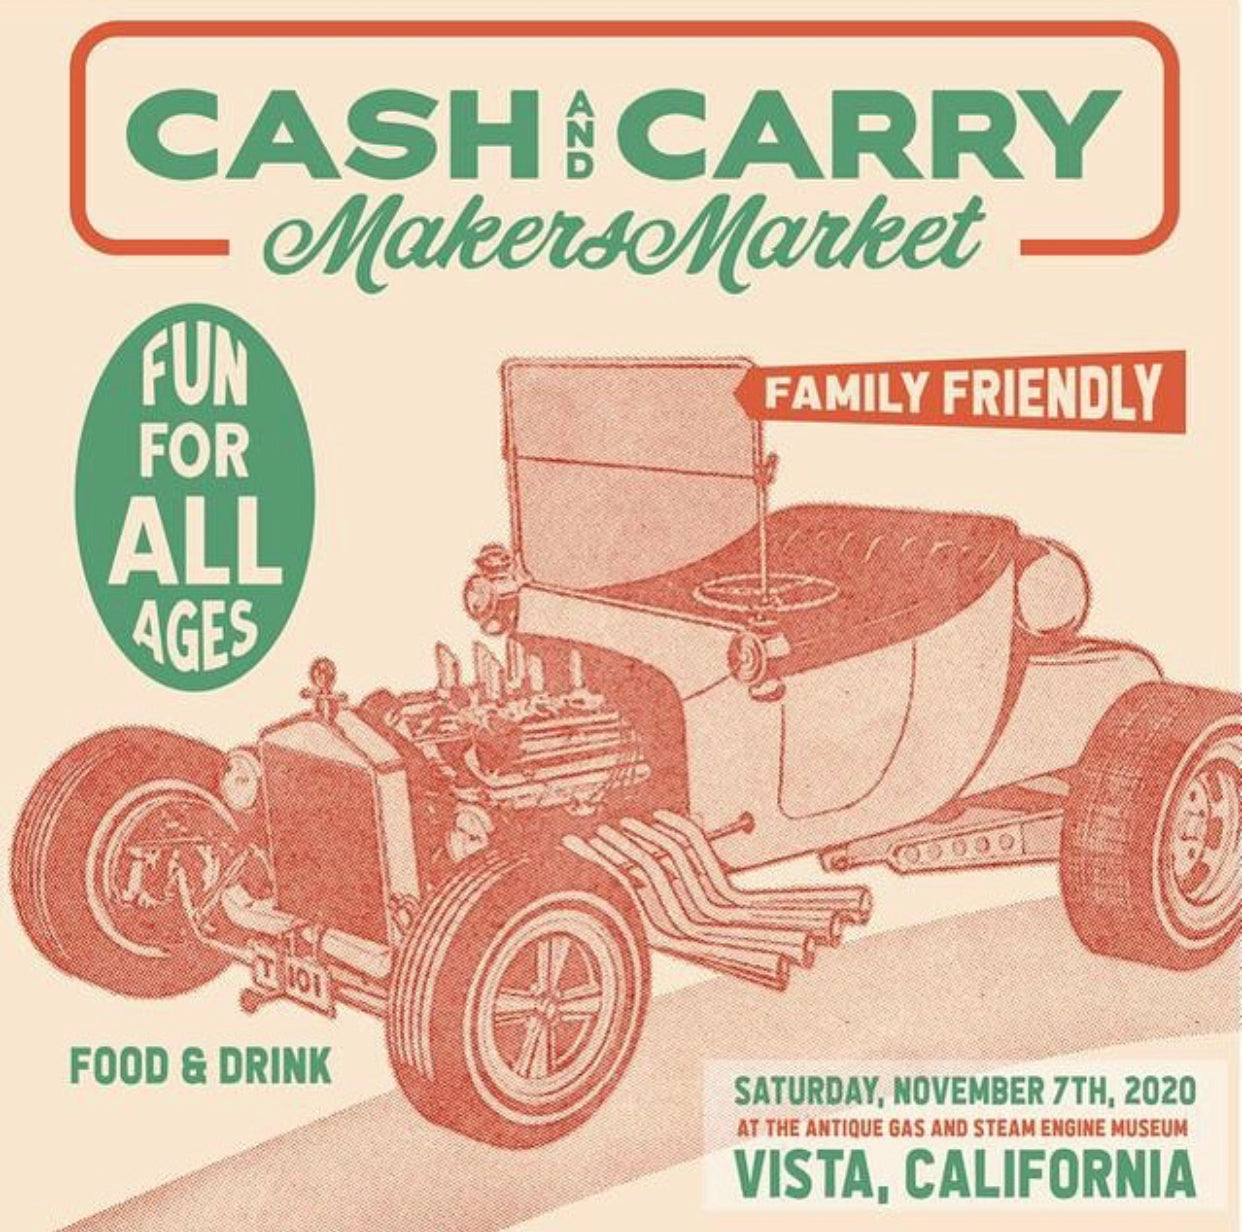 CASH AND CARRY MAKERS MARKET